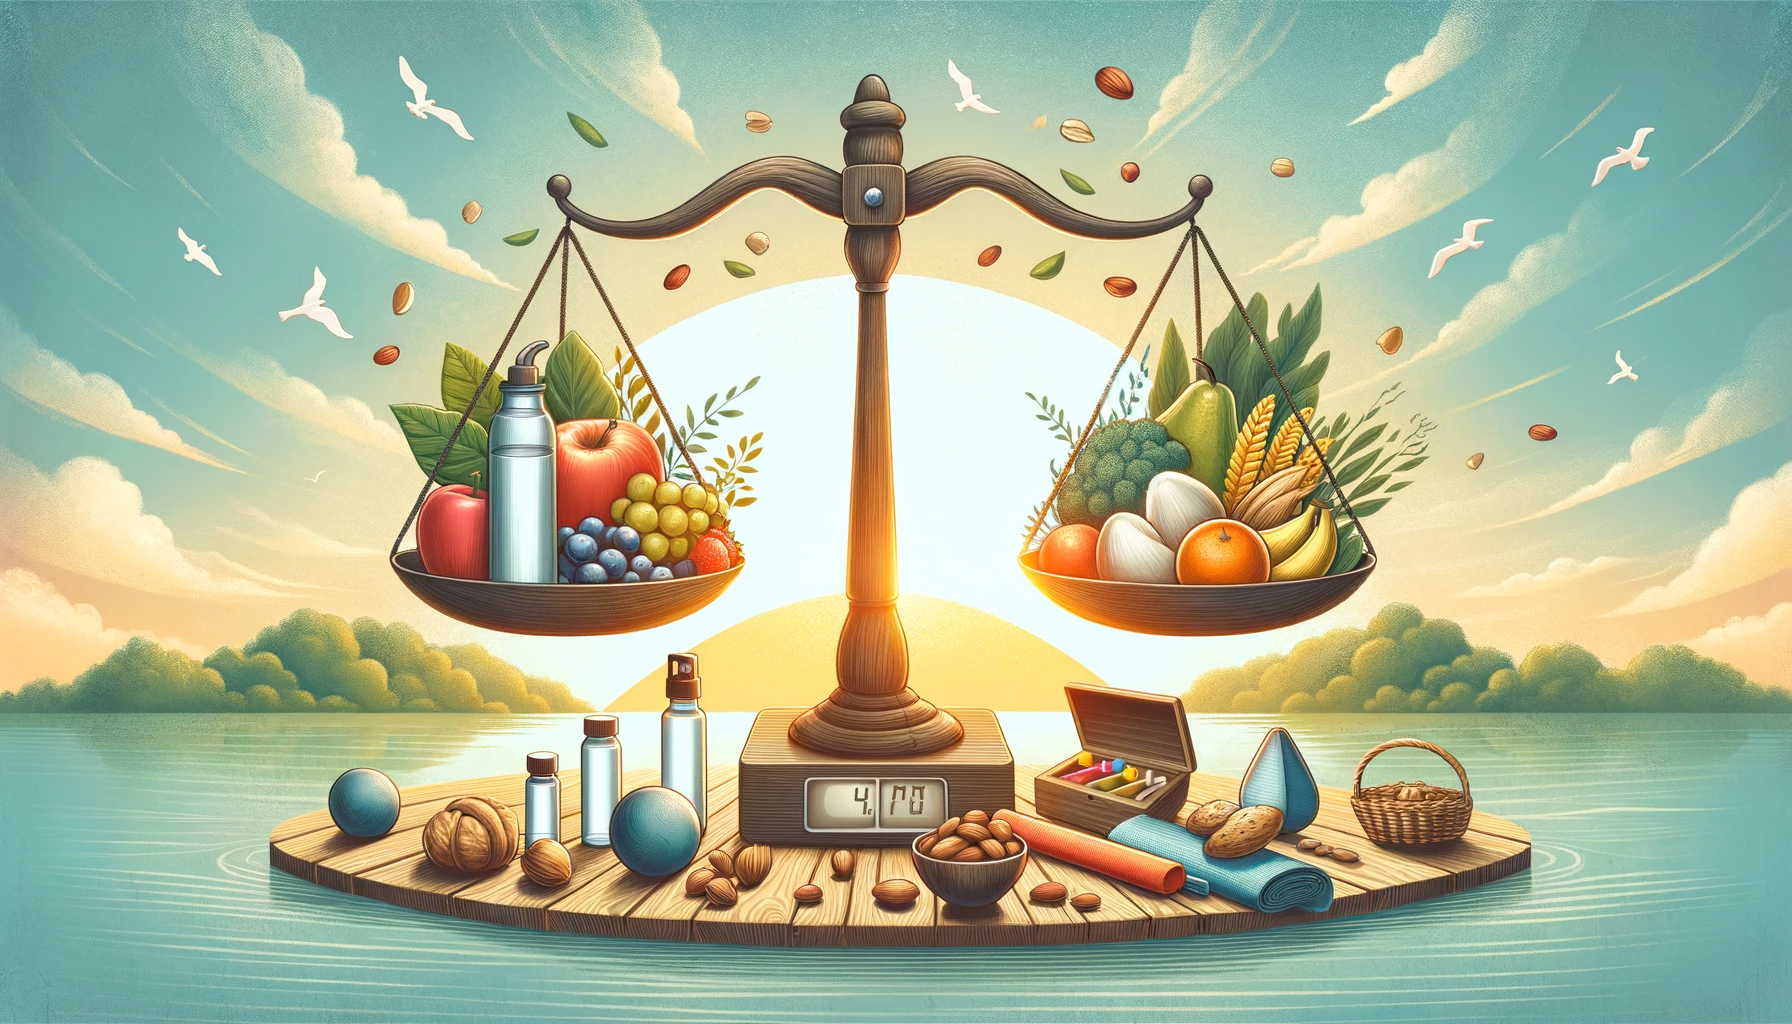 Illustration of balanced scale with healthy foods and lifestyle elements, representing hormone balance for Healthy Life - New Start blog.